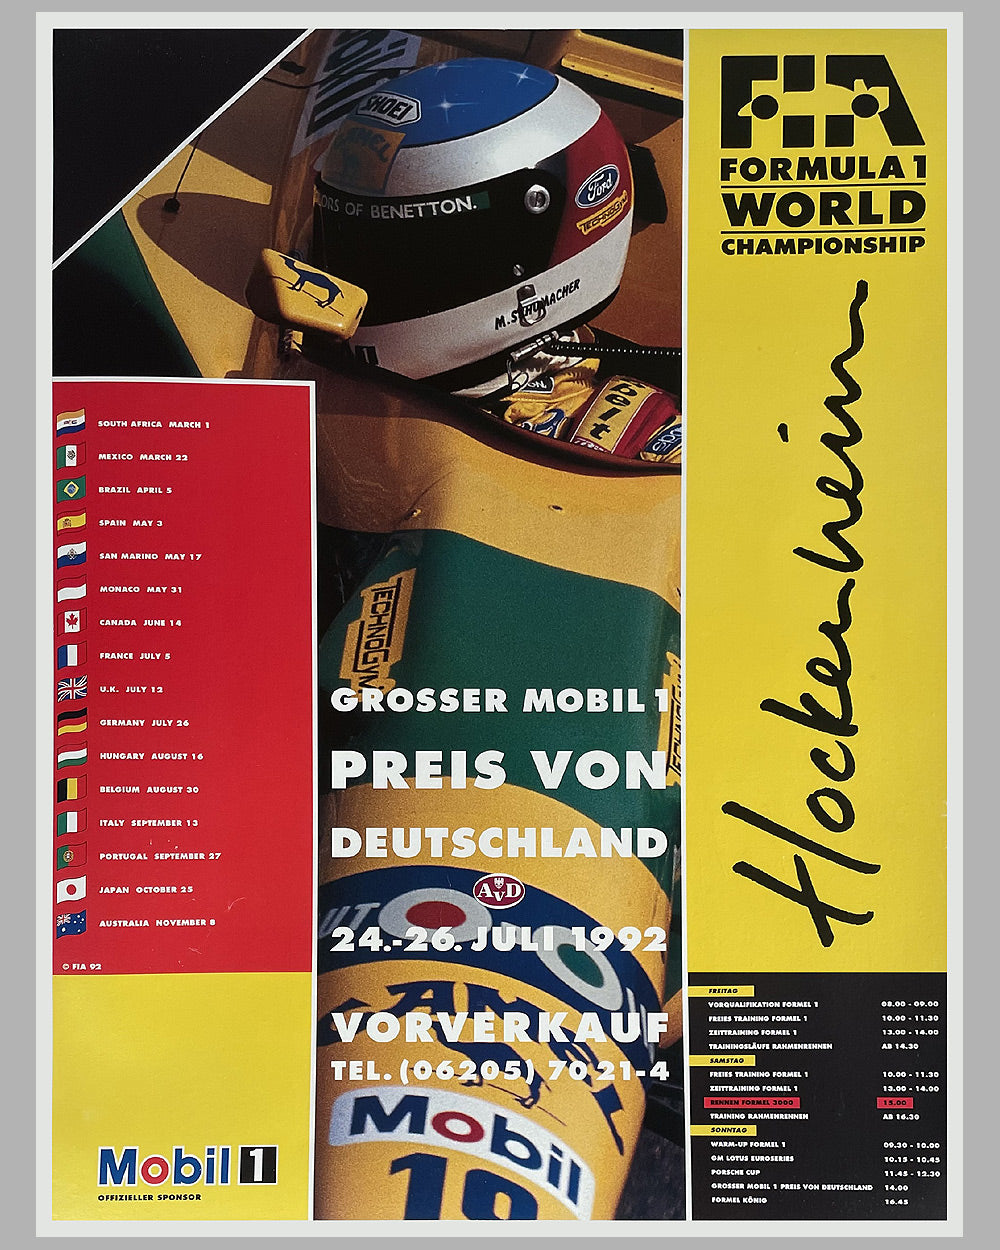 1992 Grand Prix of Germany at Hockenheim official race poster